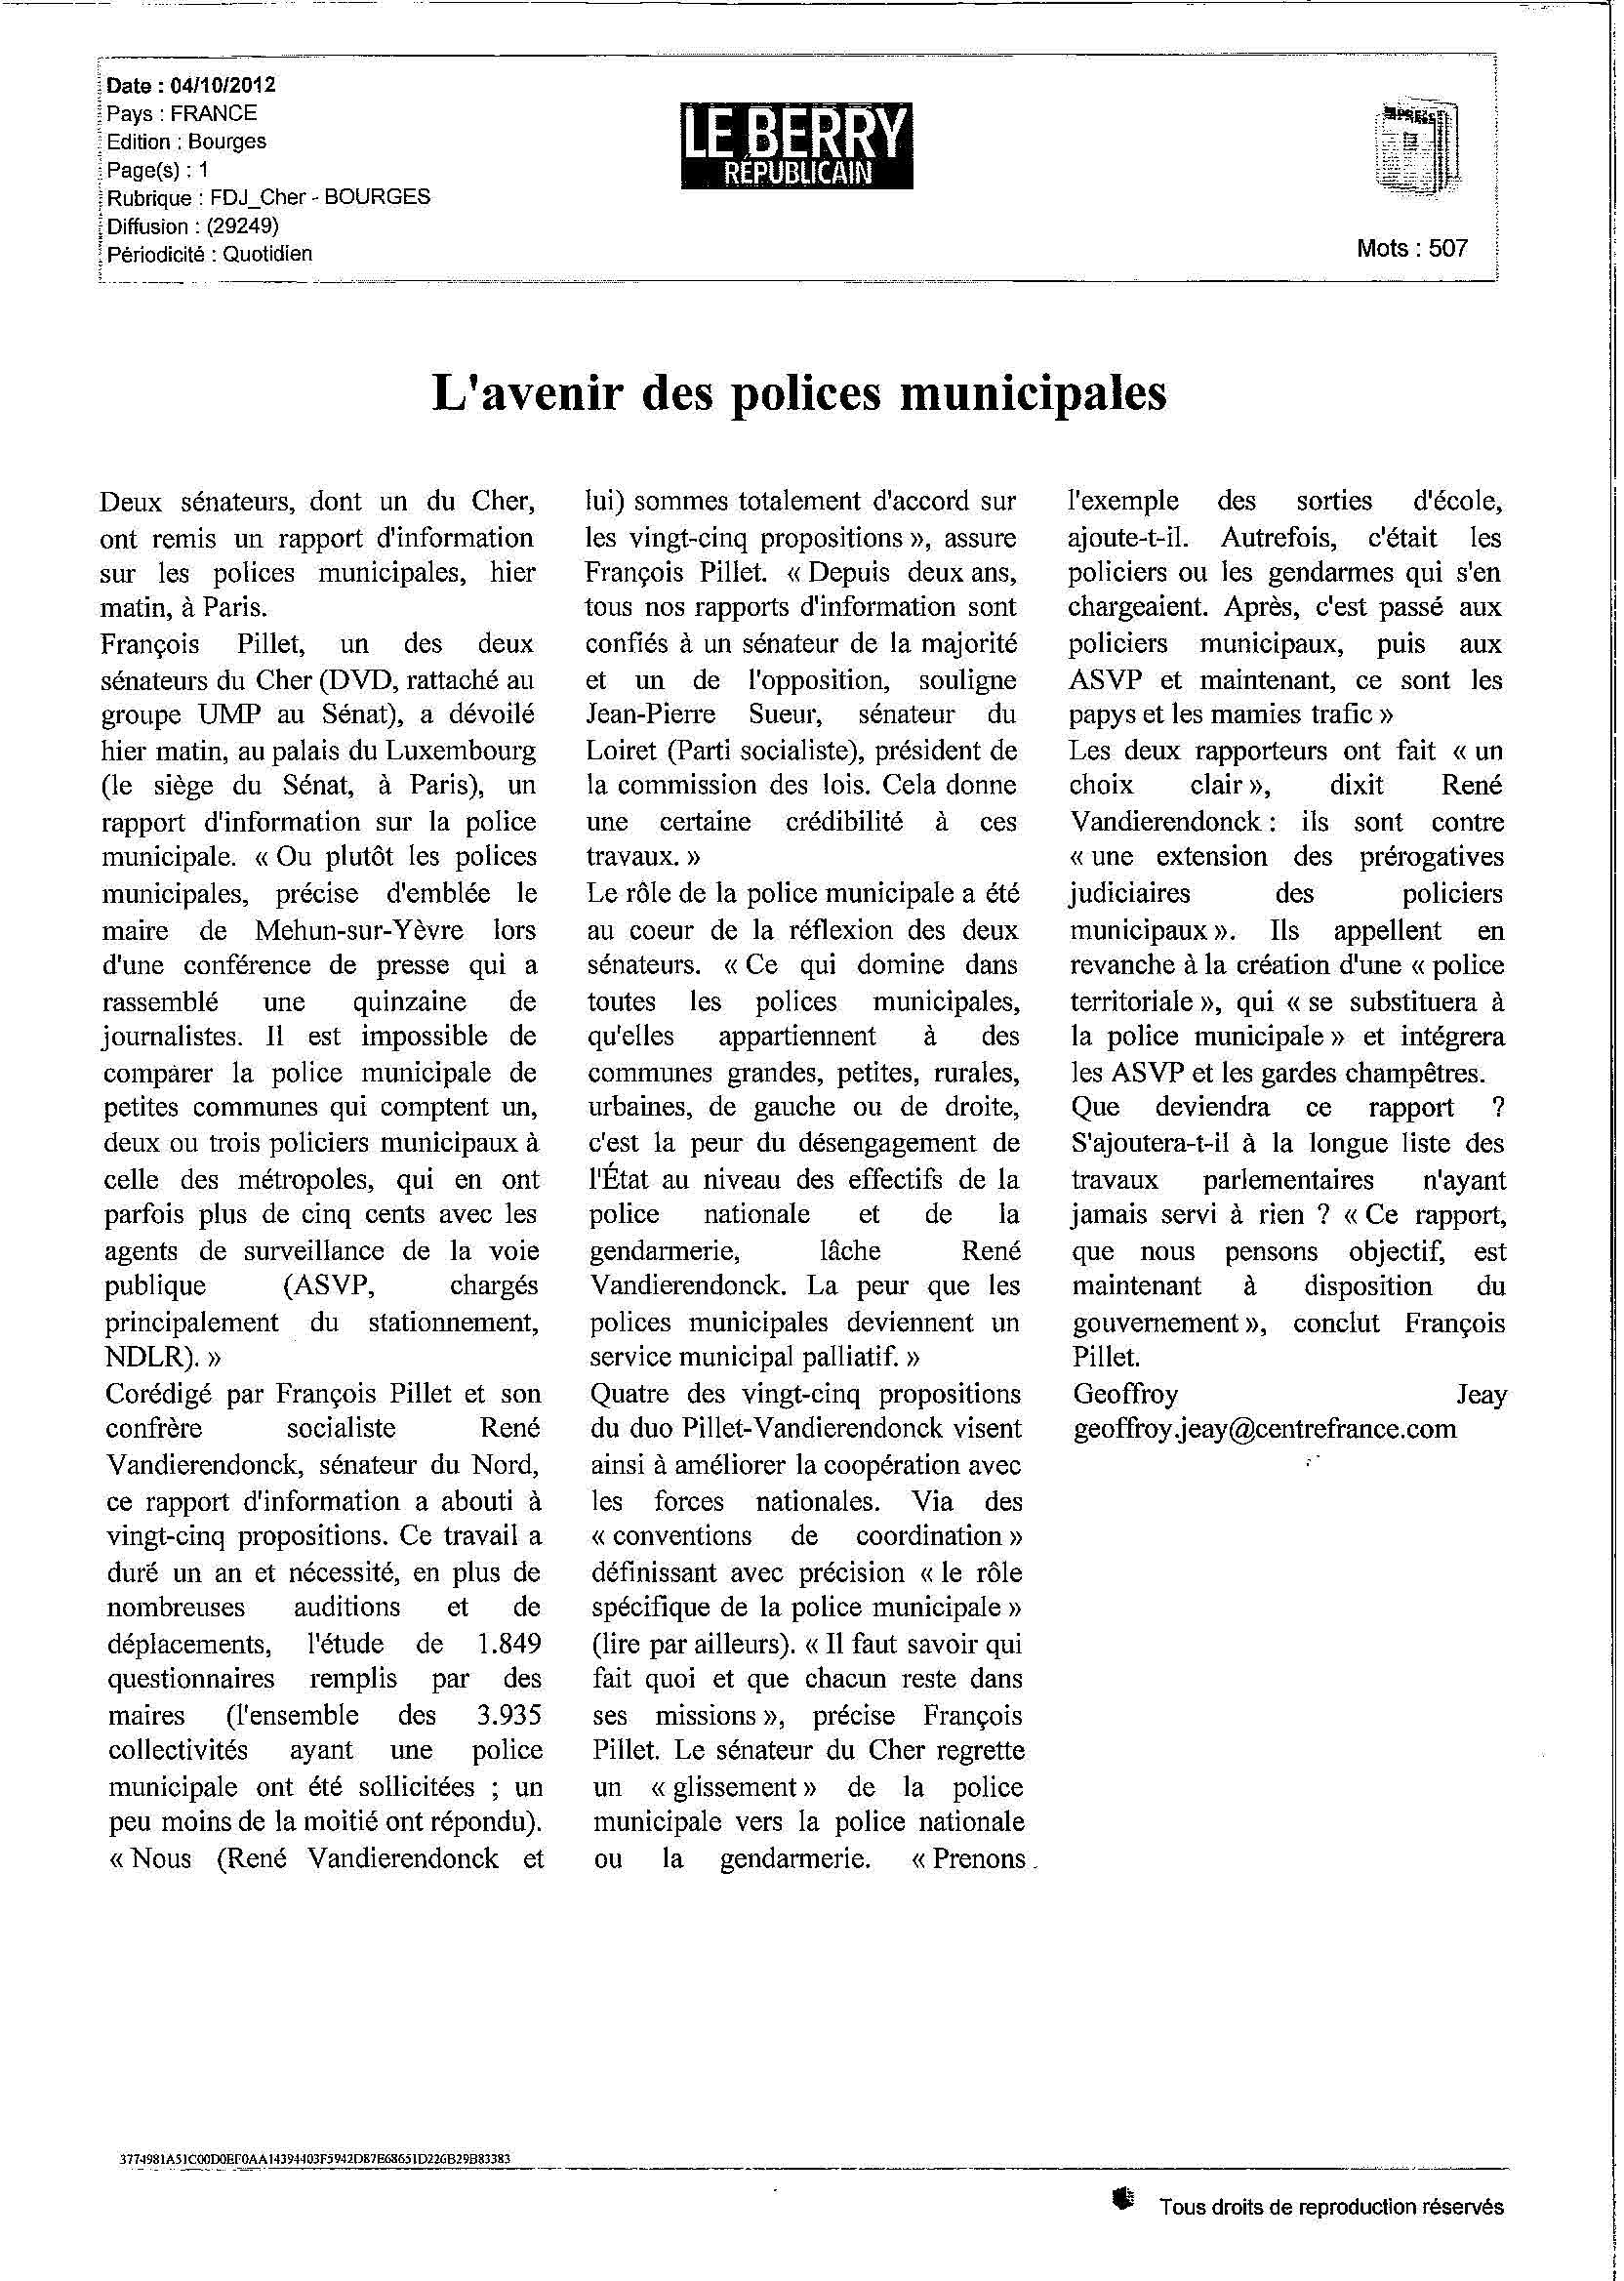 121004_Berry-republicain_polices-municipales